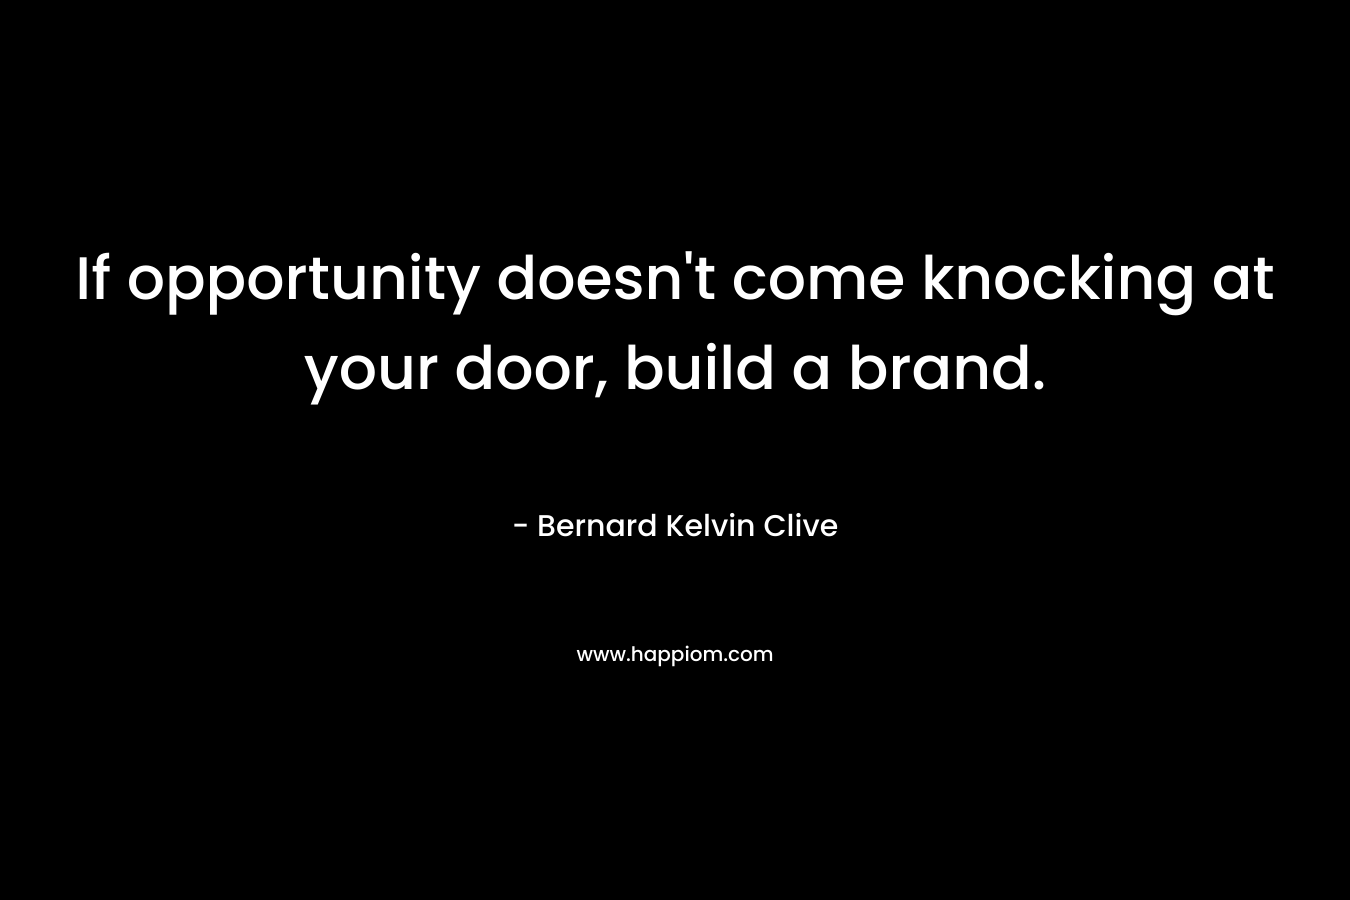 If opportunity doesn't come knocking at your door, build a brand.